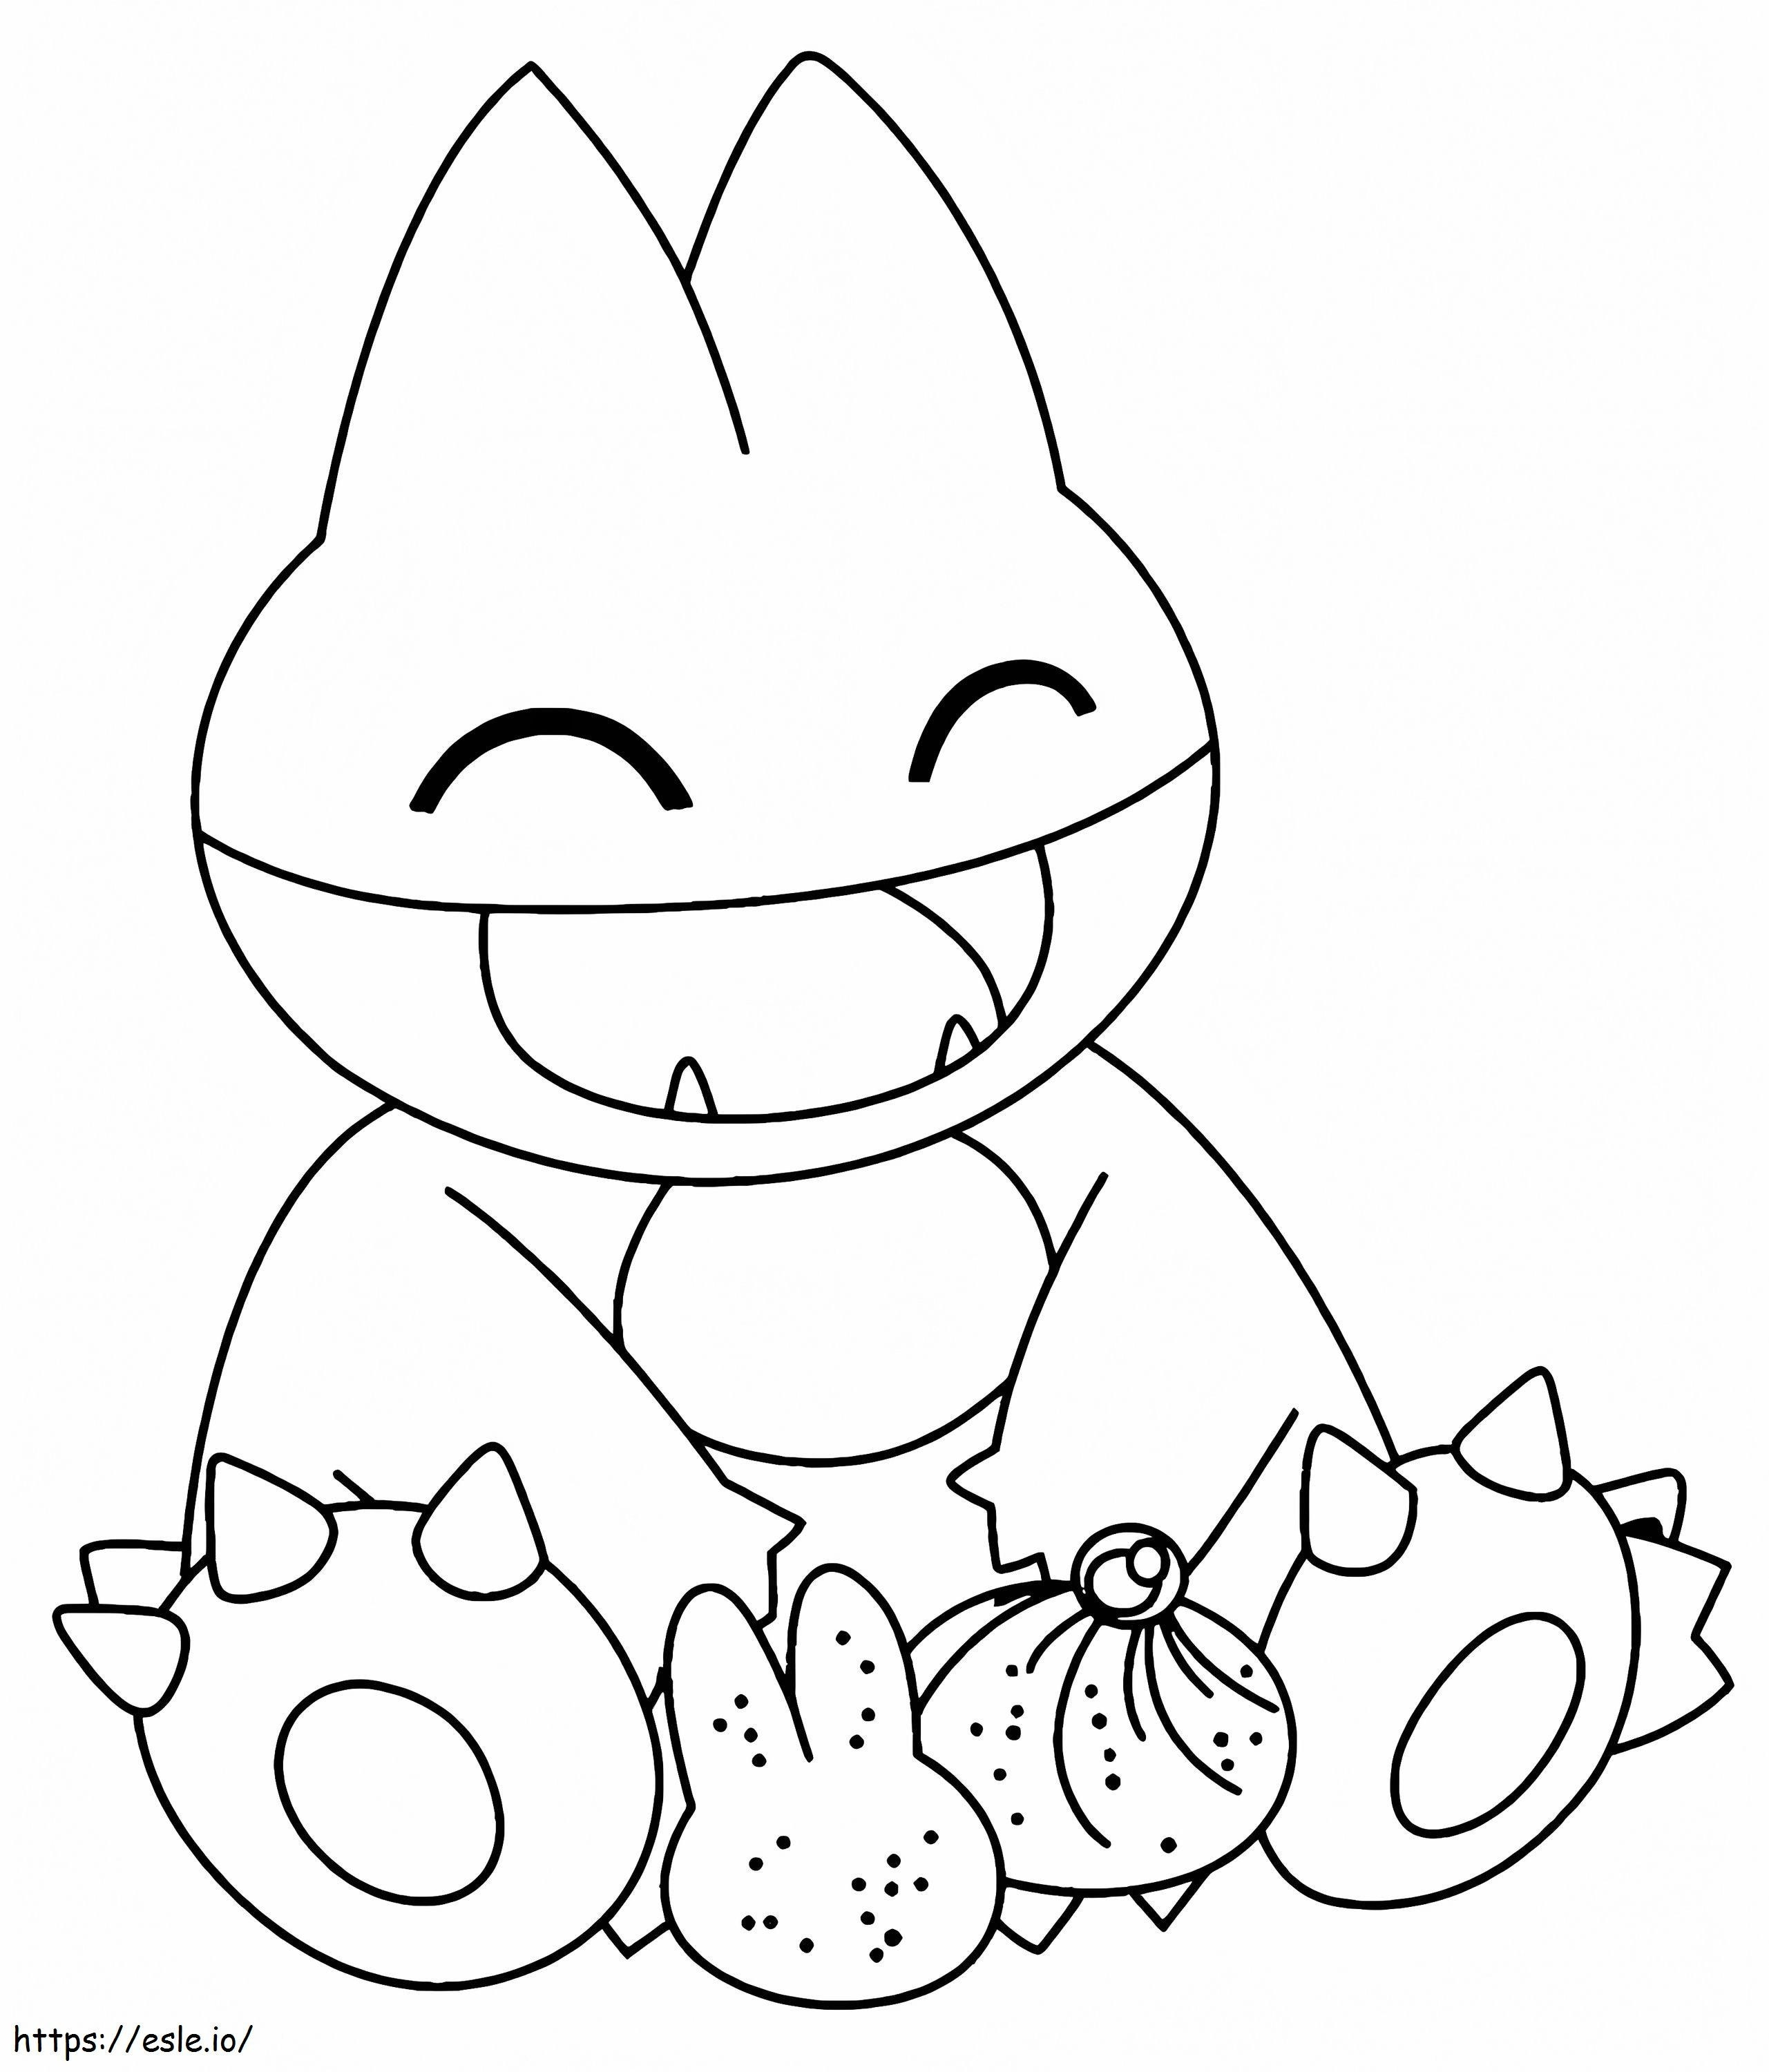 Cute Munchlax Pokemon coloring page